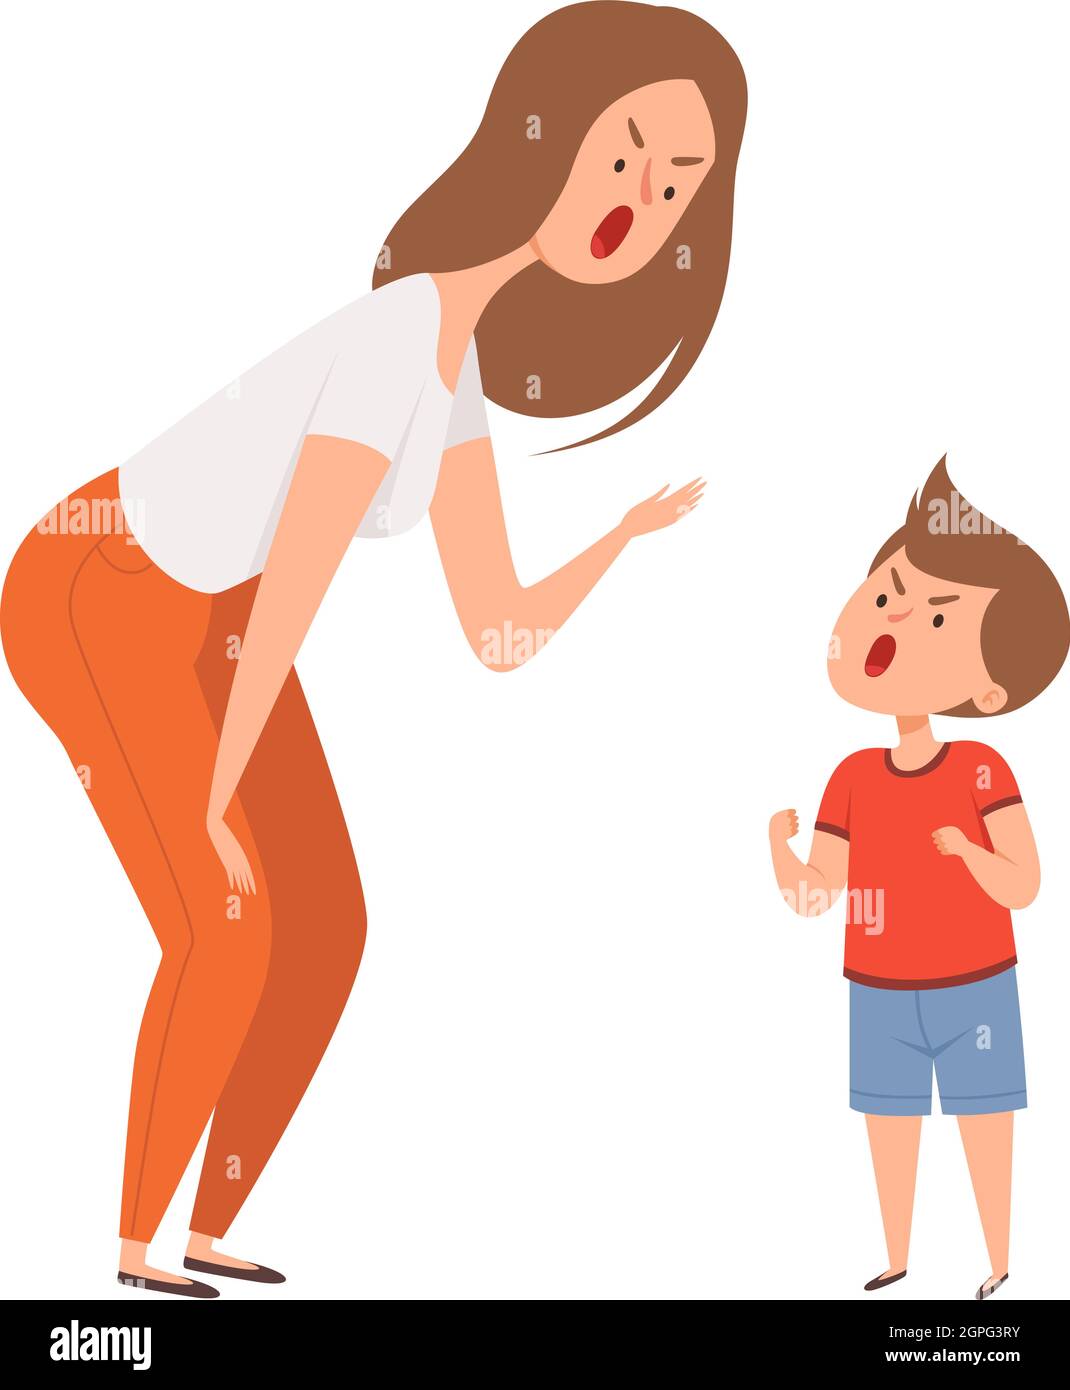 Family abuse. Woman son scream together. Family argue or quarrel. Isolated cartoon angry mother and boy vector characters Stock Vector